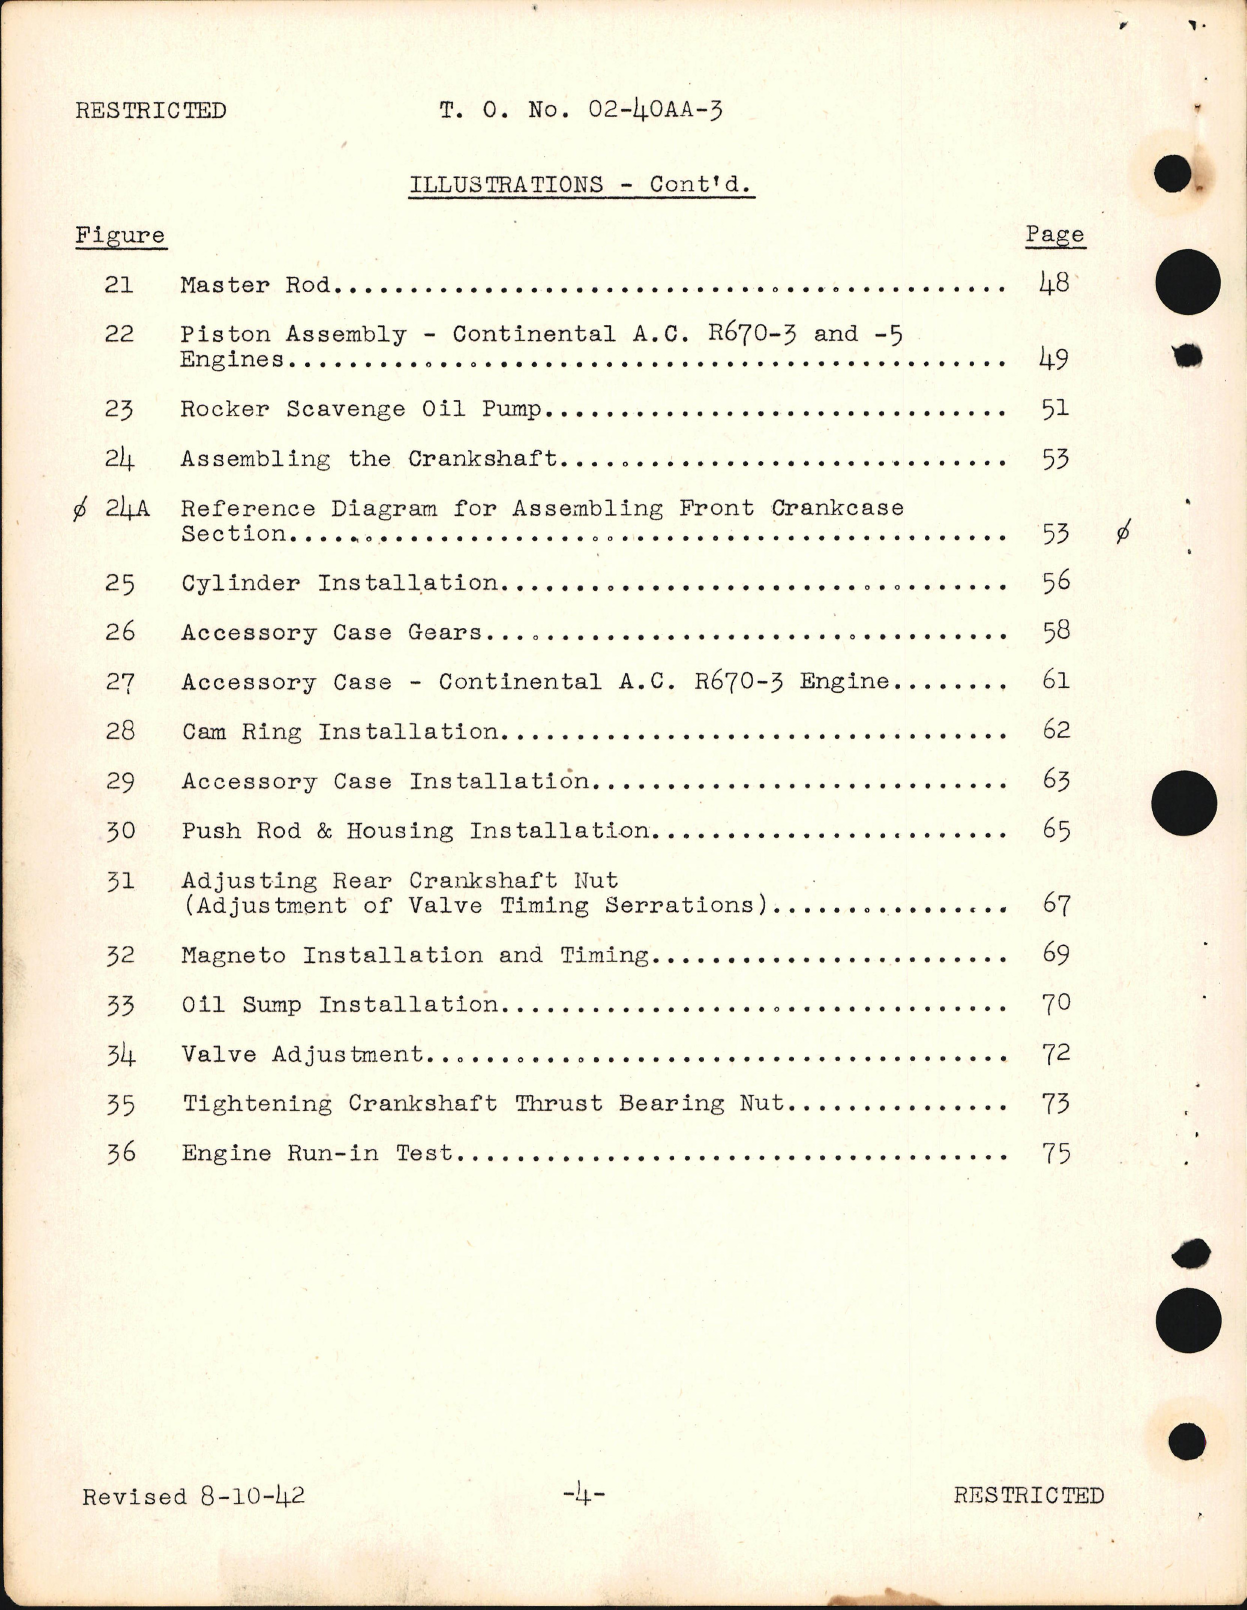 Sample page 6 from AirCorps Library document: Overhaul Instructions for R-670-3, R670-4, and R670-5 Engines